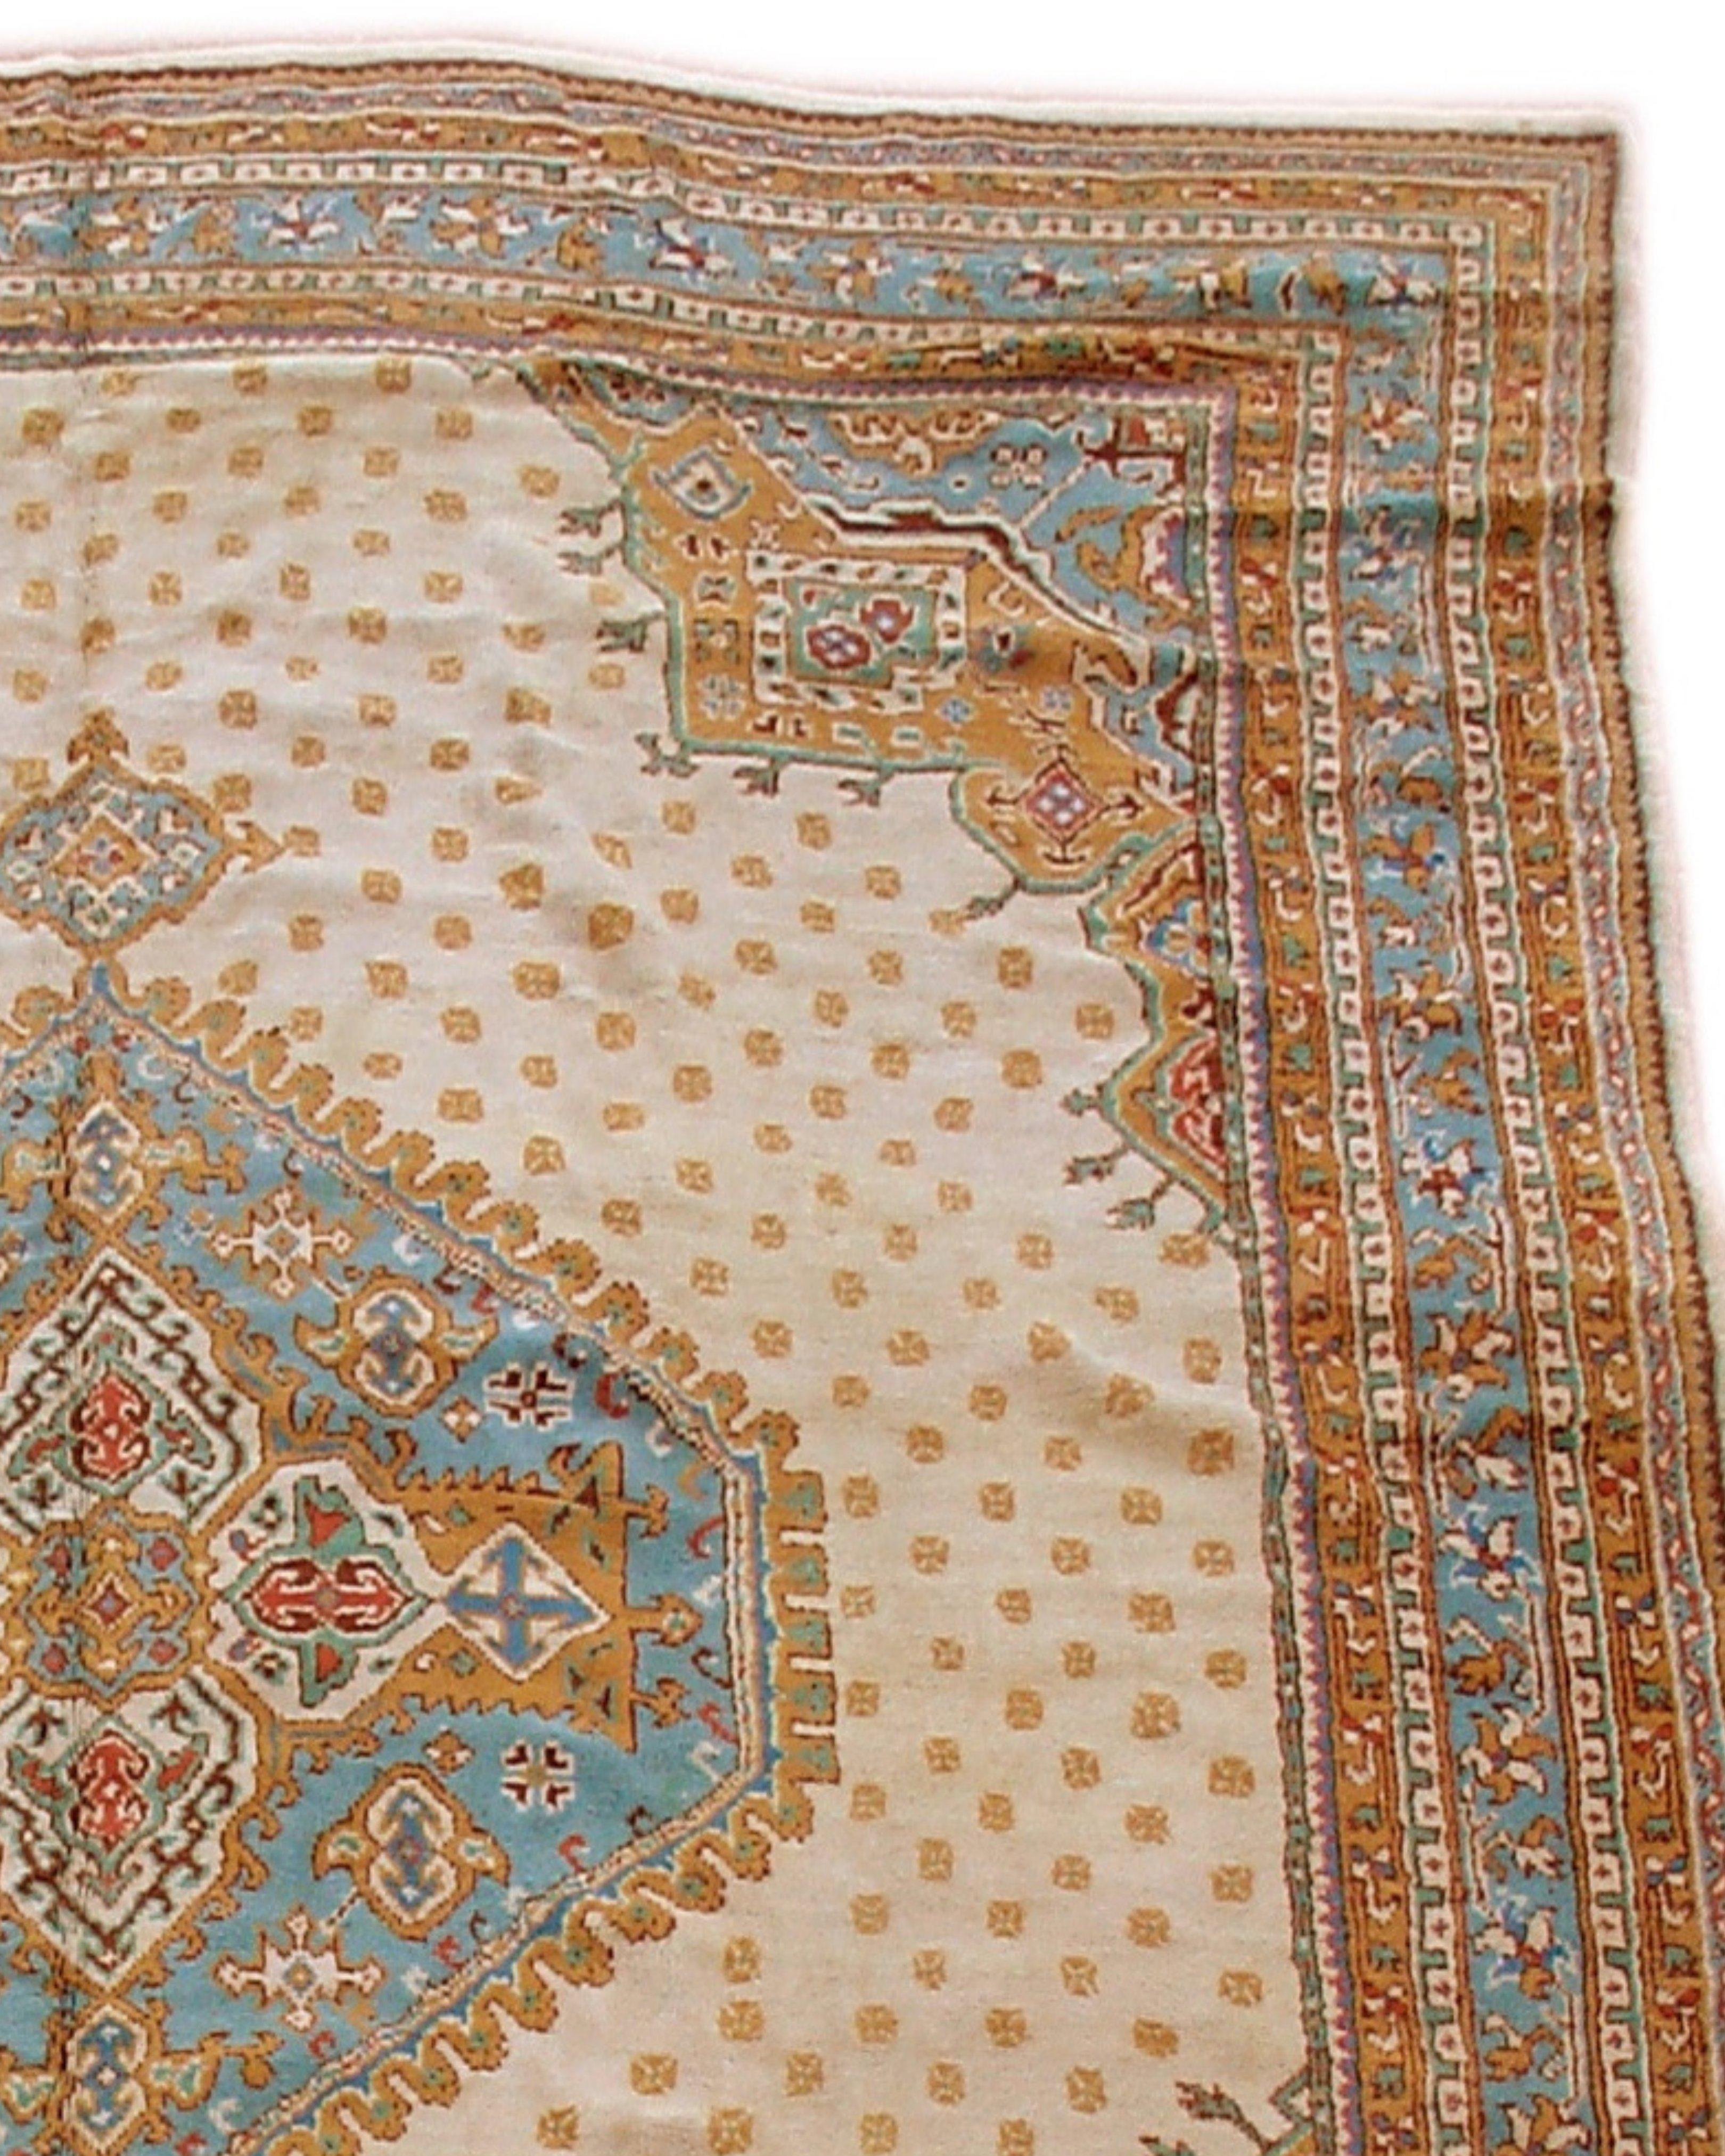 Antique Large Anatolian Turkish Oushak Rug, Early 20th Century

Oushak carpets gained popularity in Western markets around the turn of the century and were commissioned by various firms weaving in and around the western Anatolian town of Ushak. The